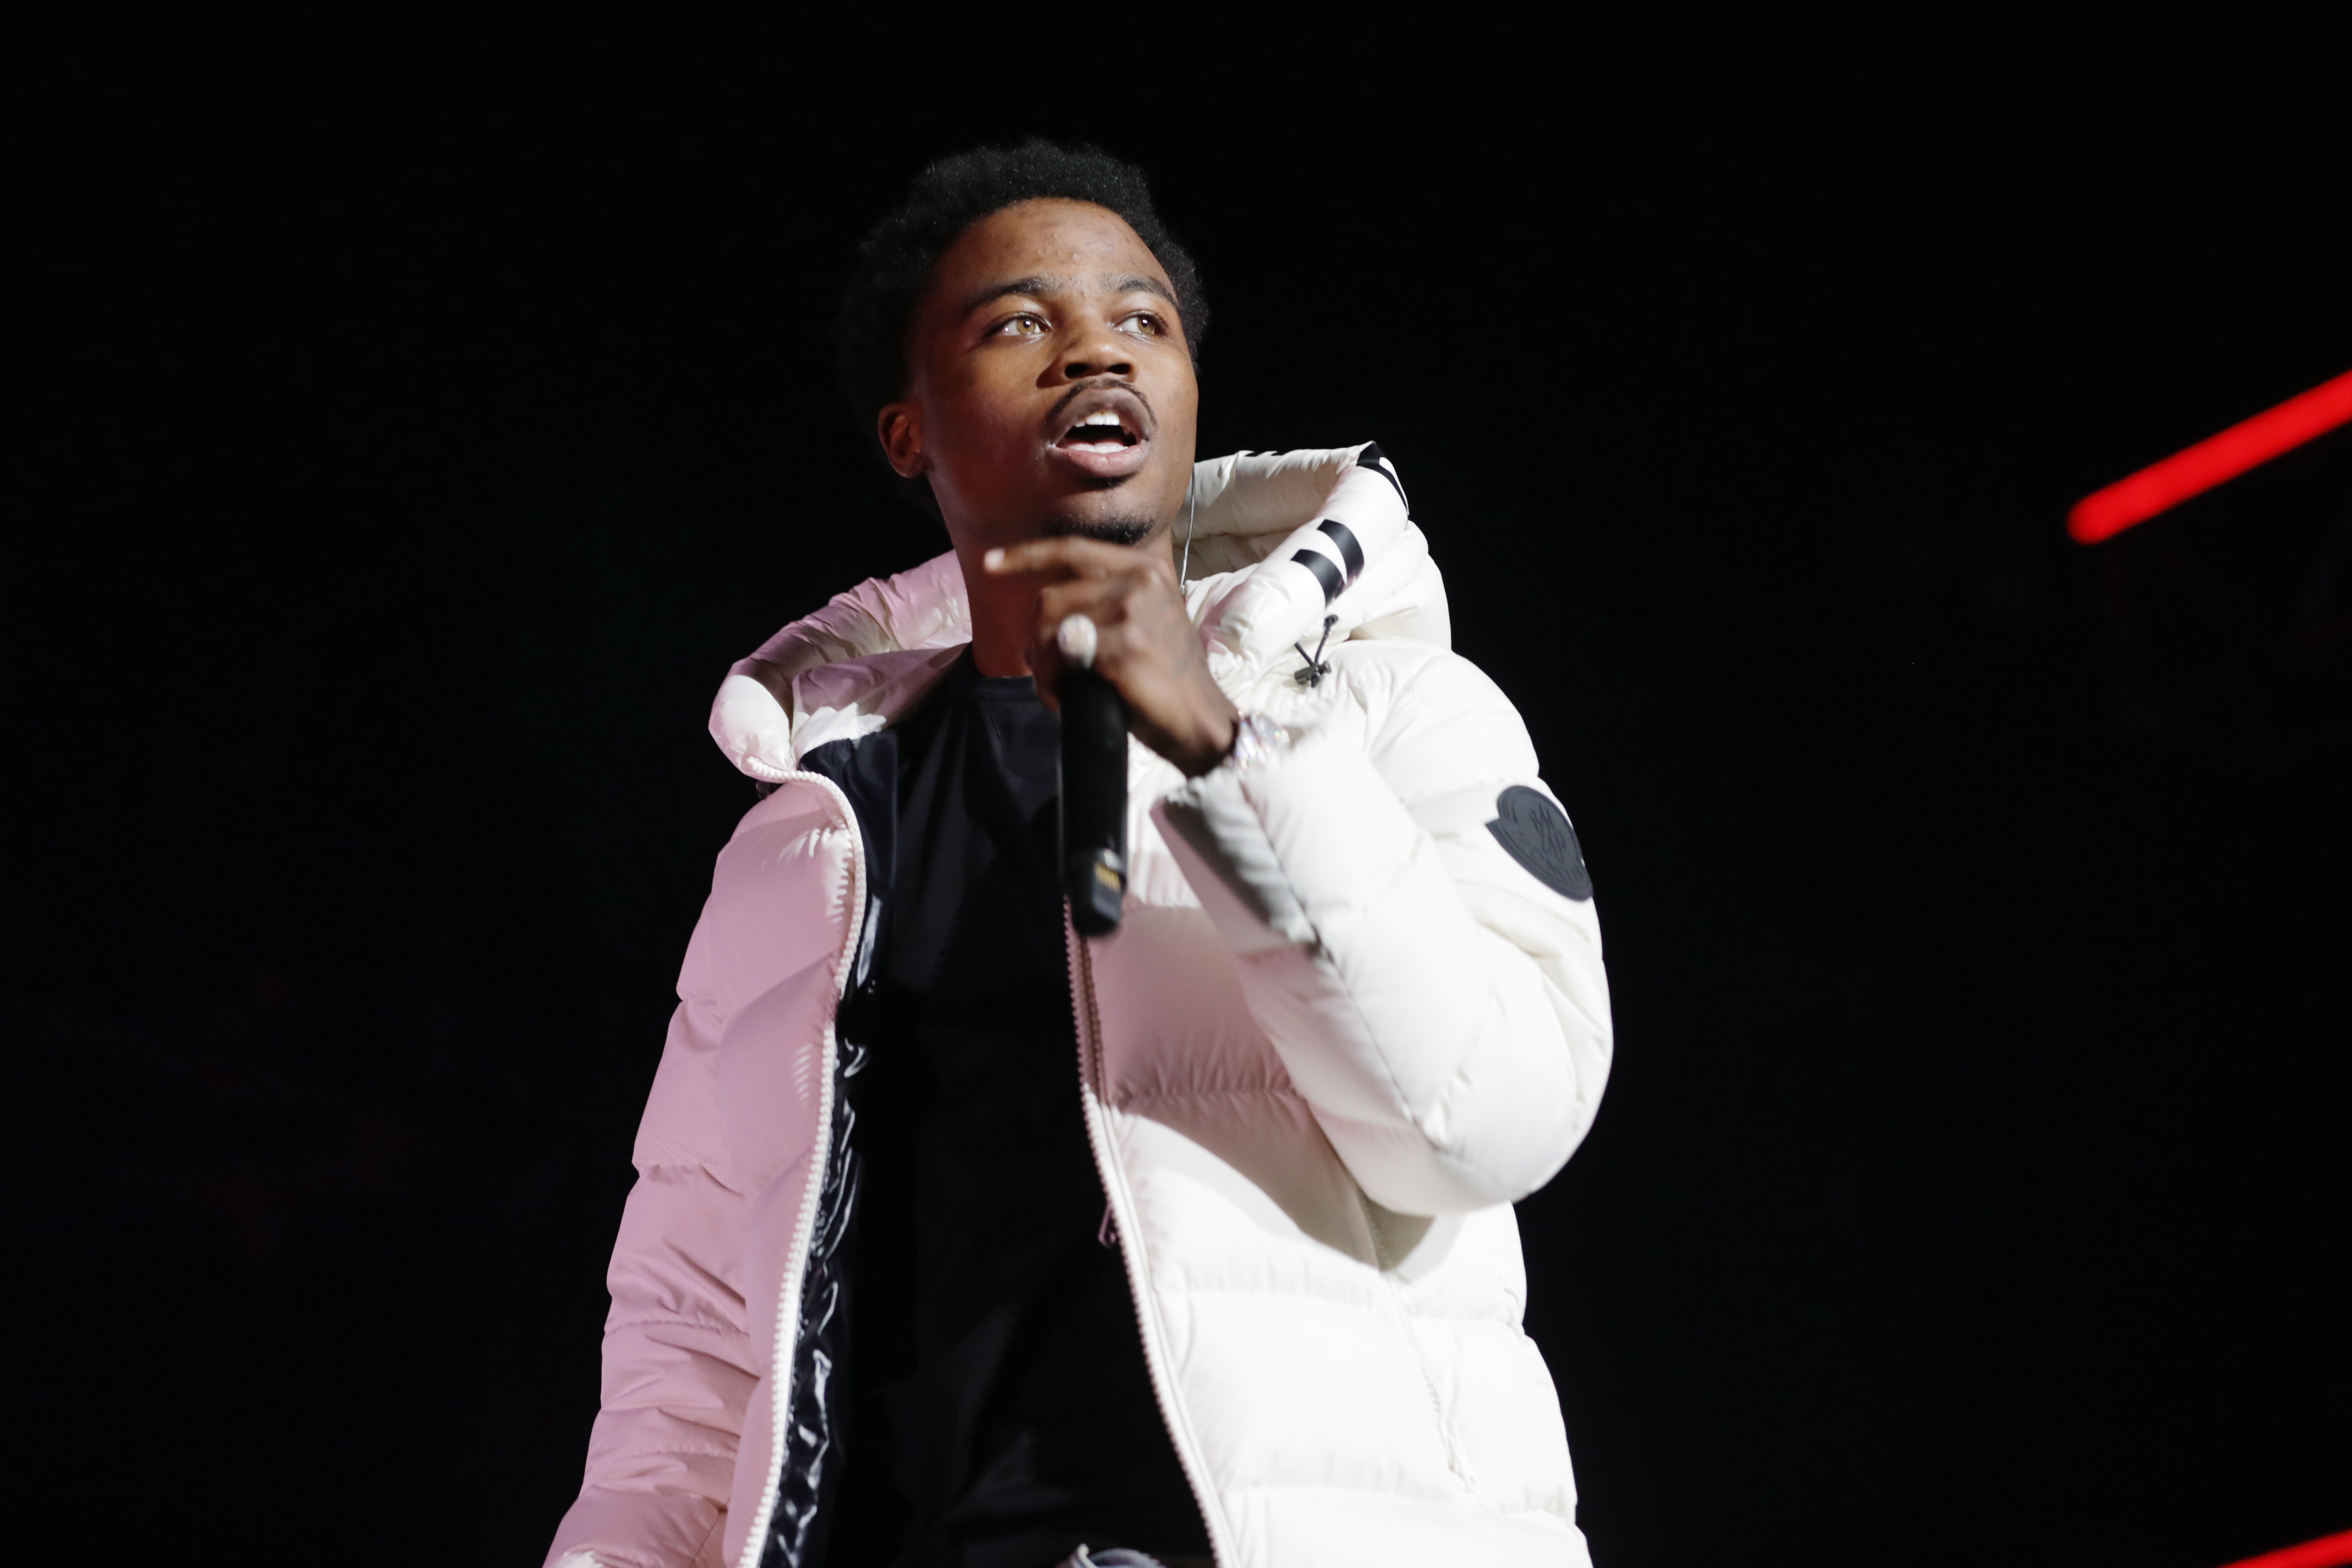 Roddy Ricch Recounts Meeting Jay-Z At The Grammys